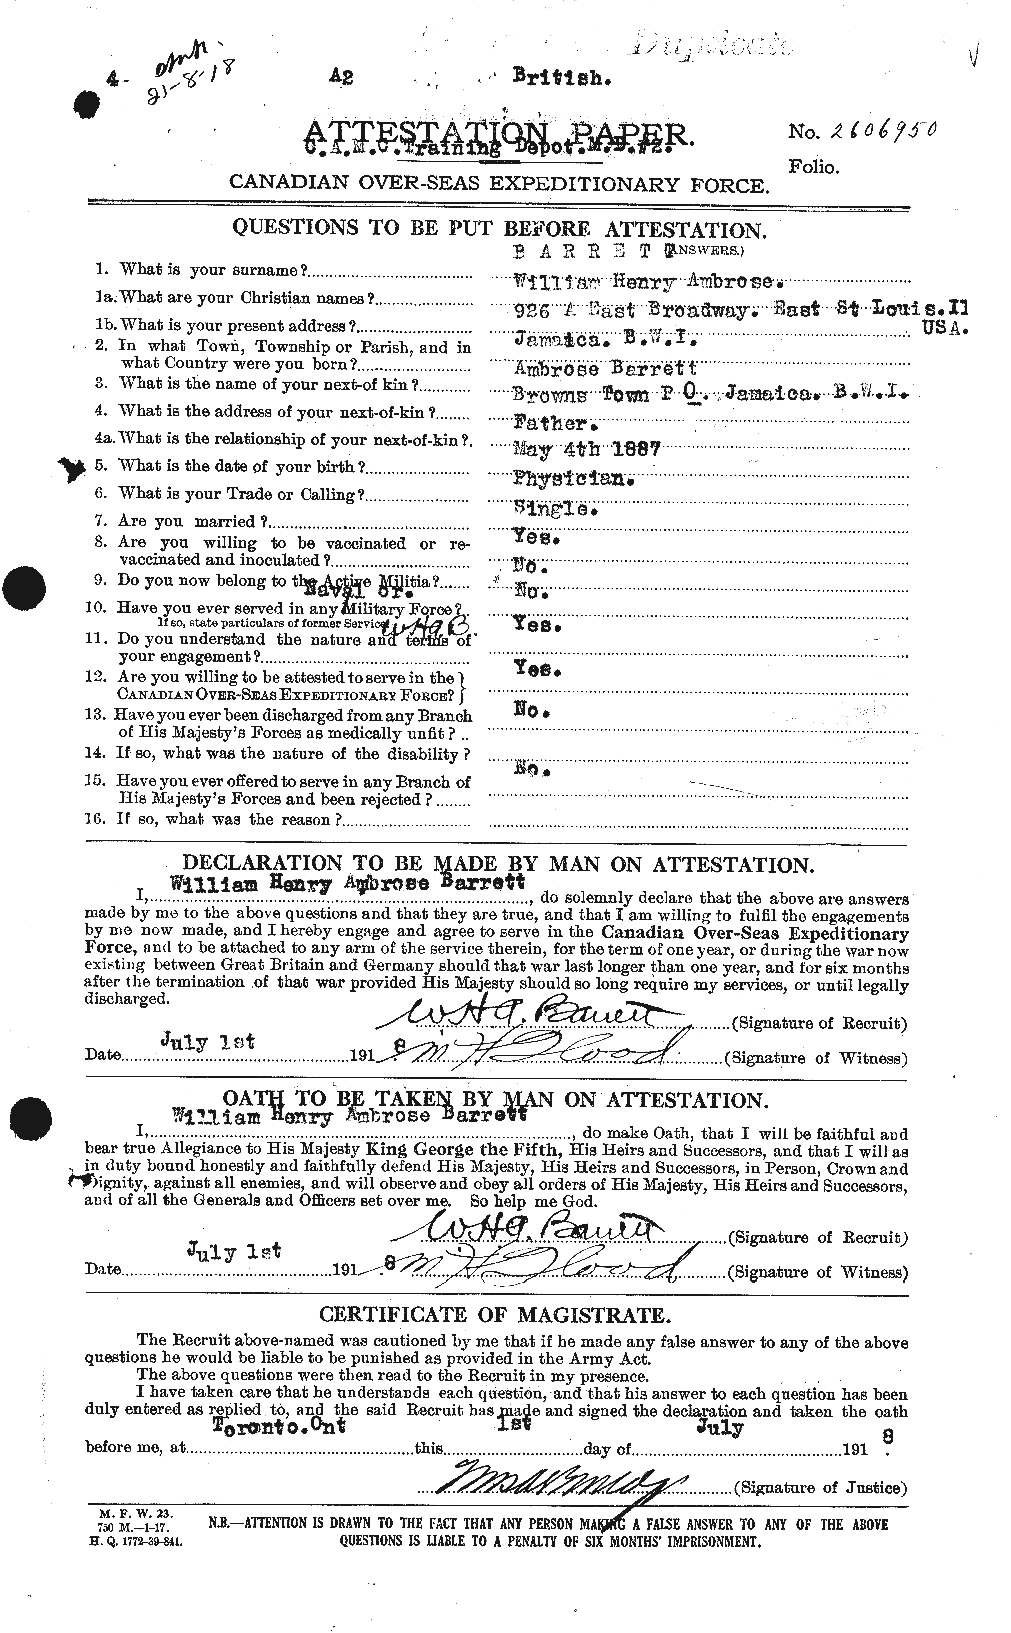 Personnel Records of the First World War - CEF 220126a